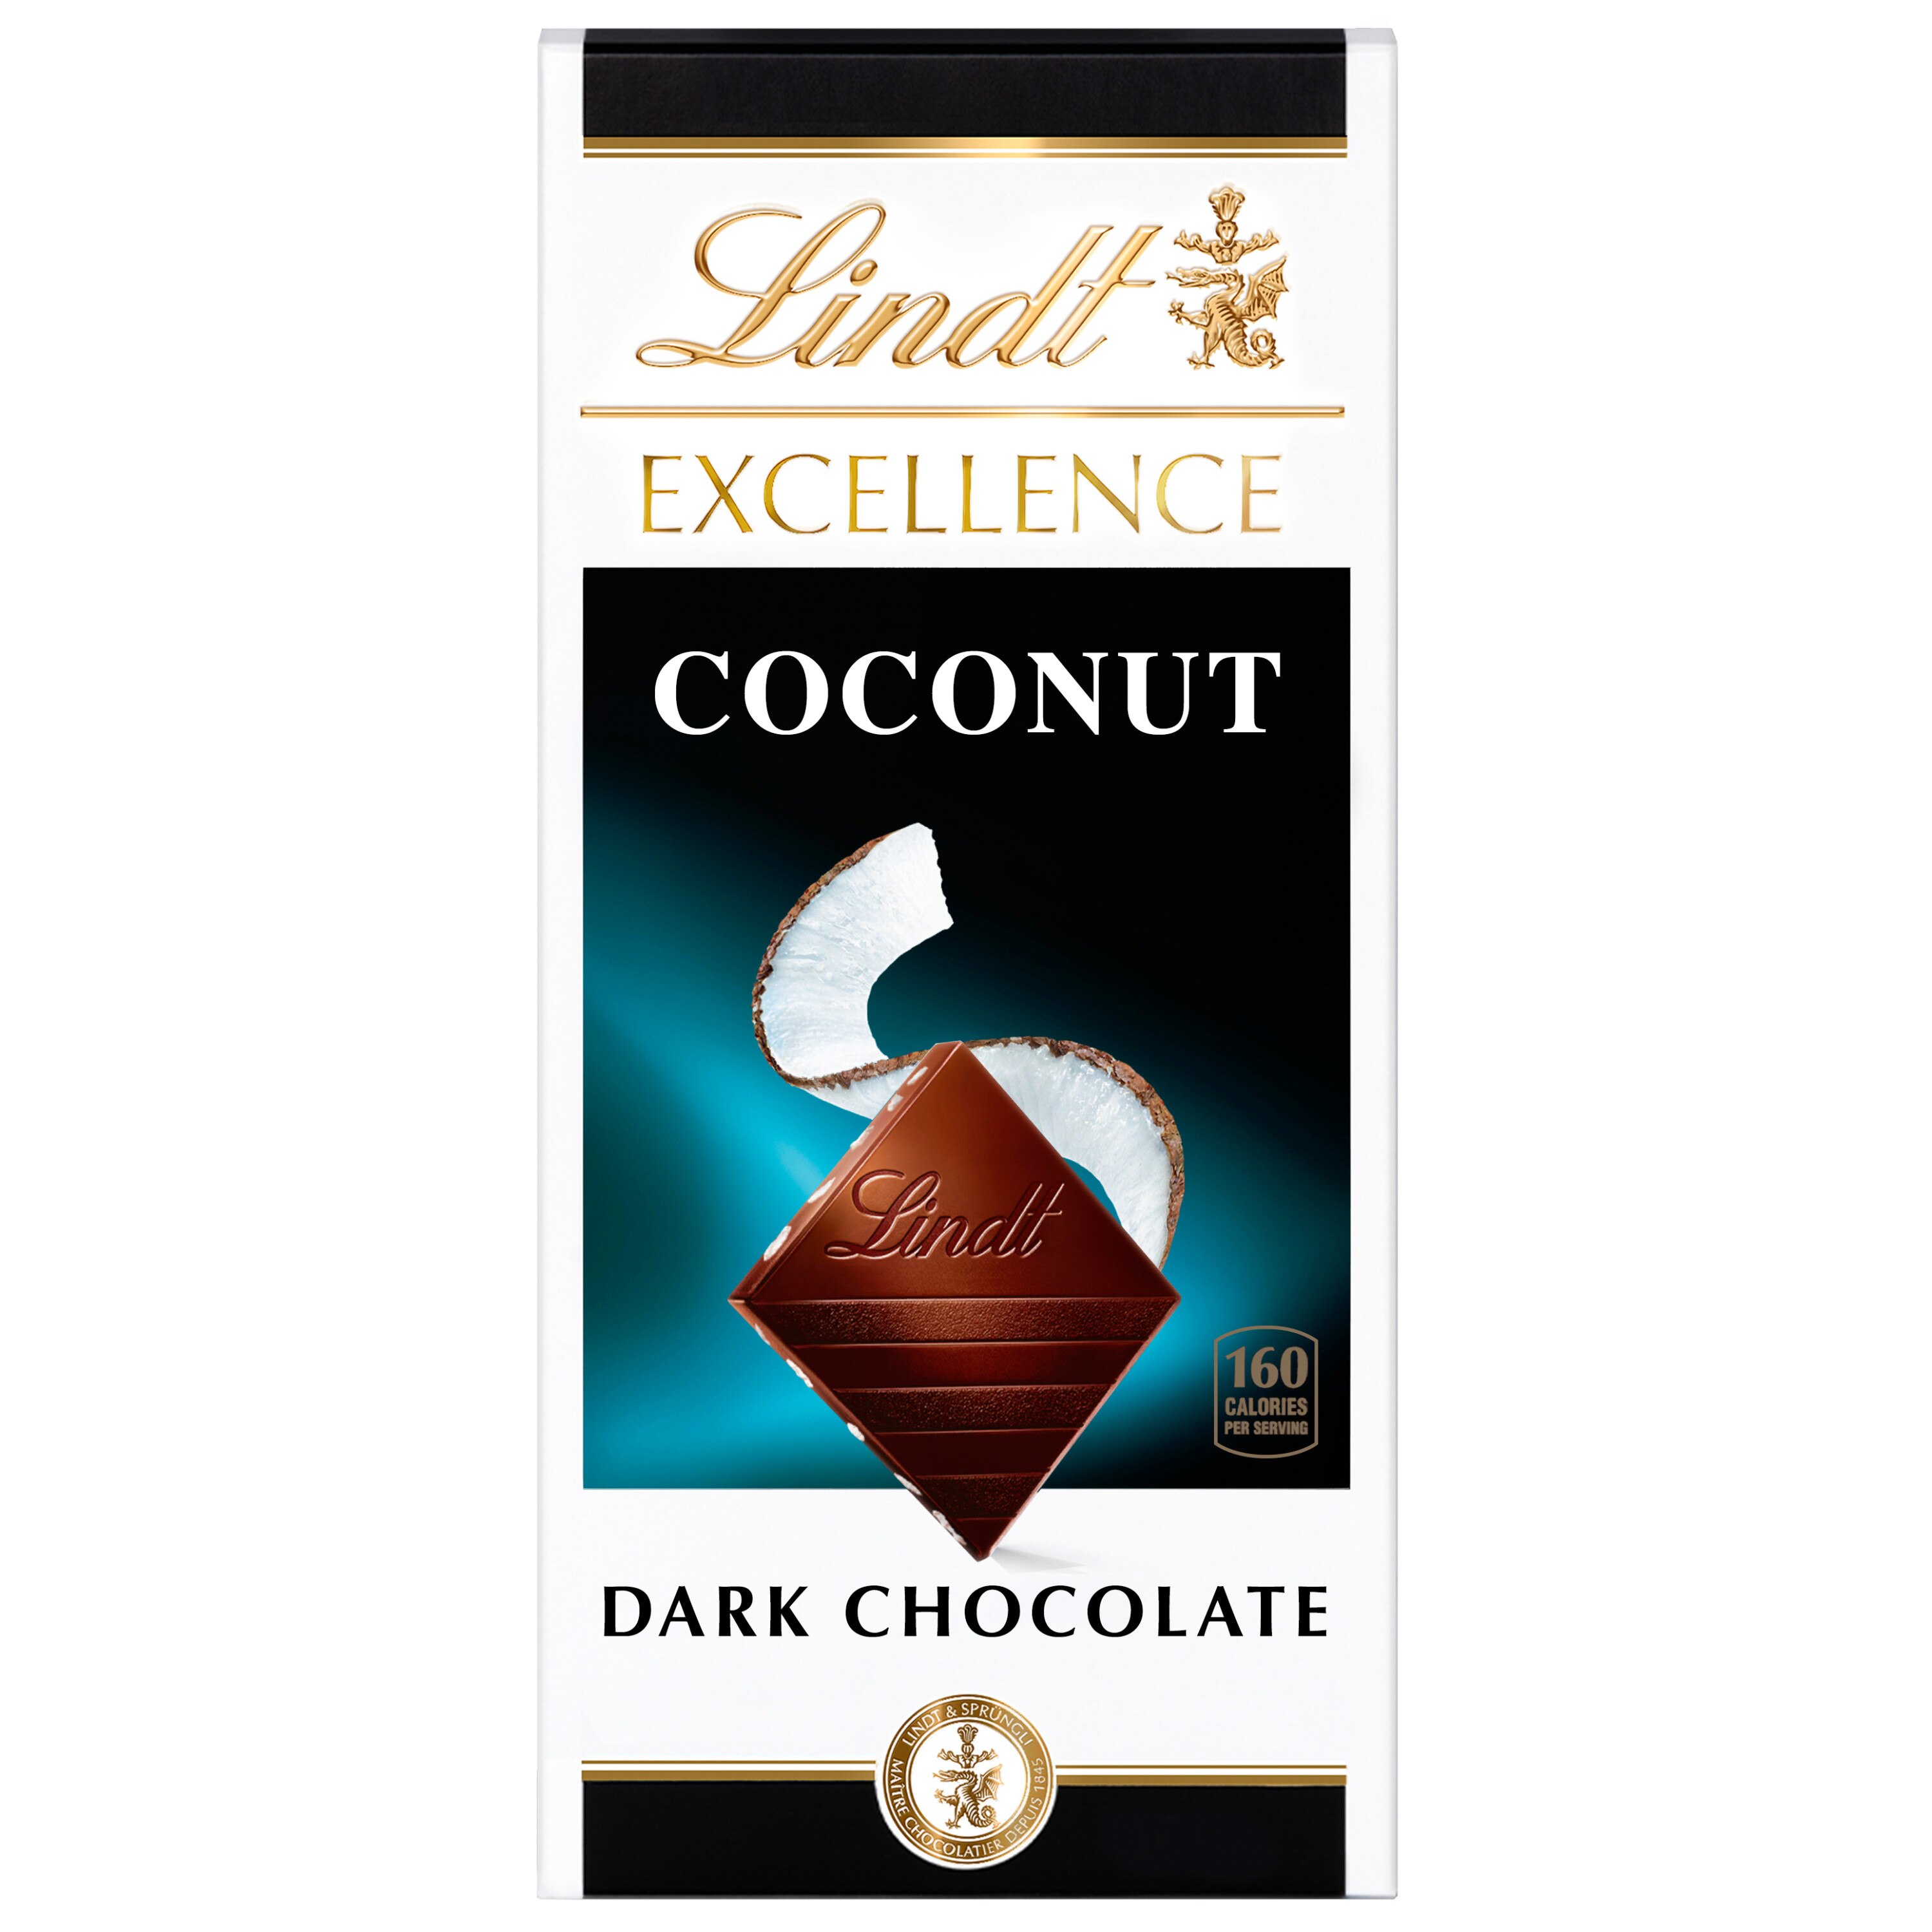 Lindt EXCELLENCE Coconut Dark Chocolate Bar, Dark Chocolate Candy with Coconut Flakes, 3.5 OZ